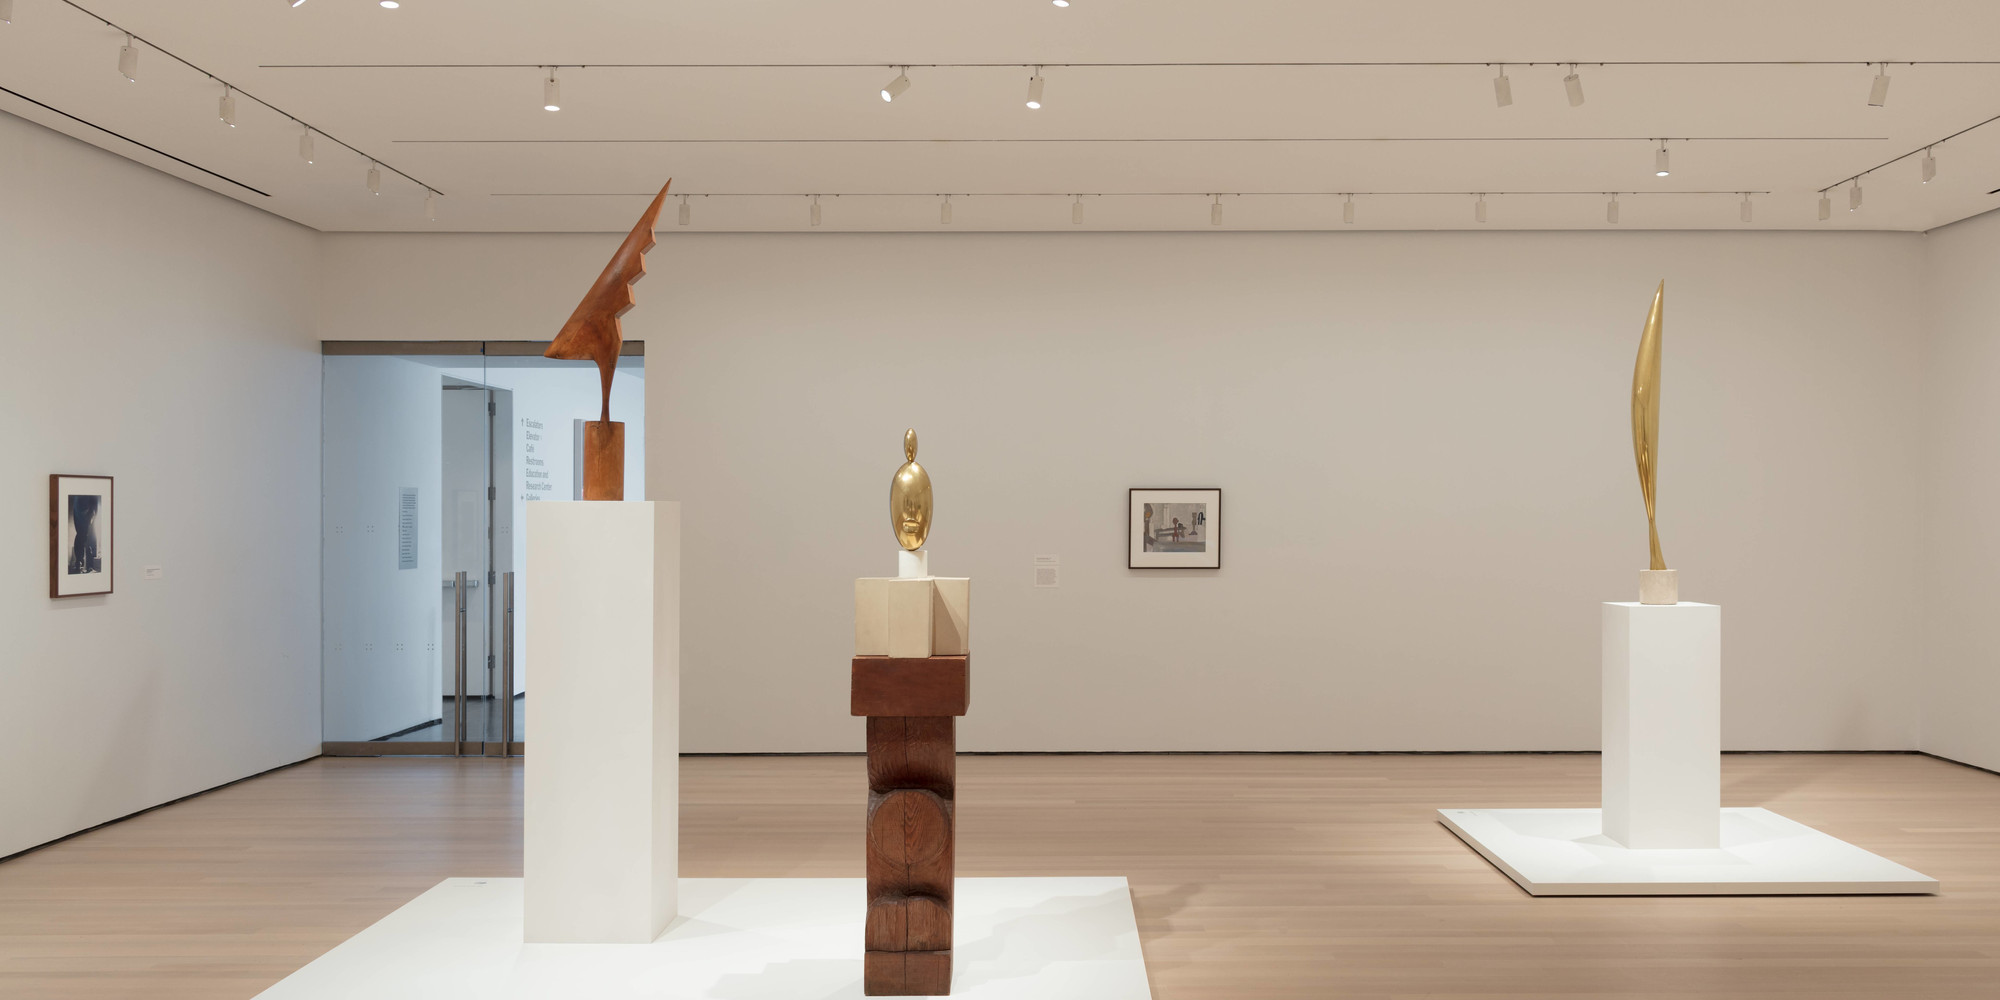 Installation view of the exhibition Constantin Brancusi Sculpture, The Museum of Modern Art, July 22, 2018–June 15, 2019. Photo: Denis Doorly. © 2019 The Museum of Modern Art, New York